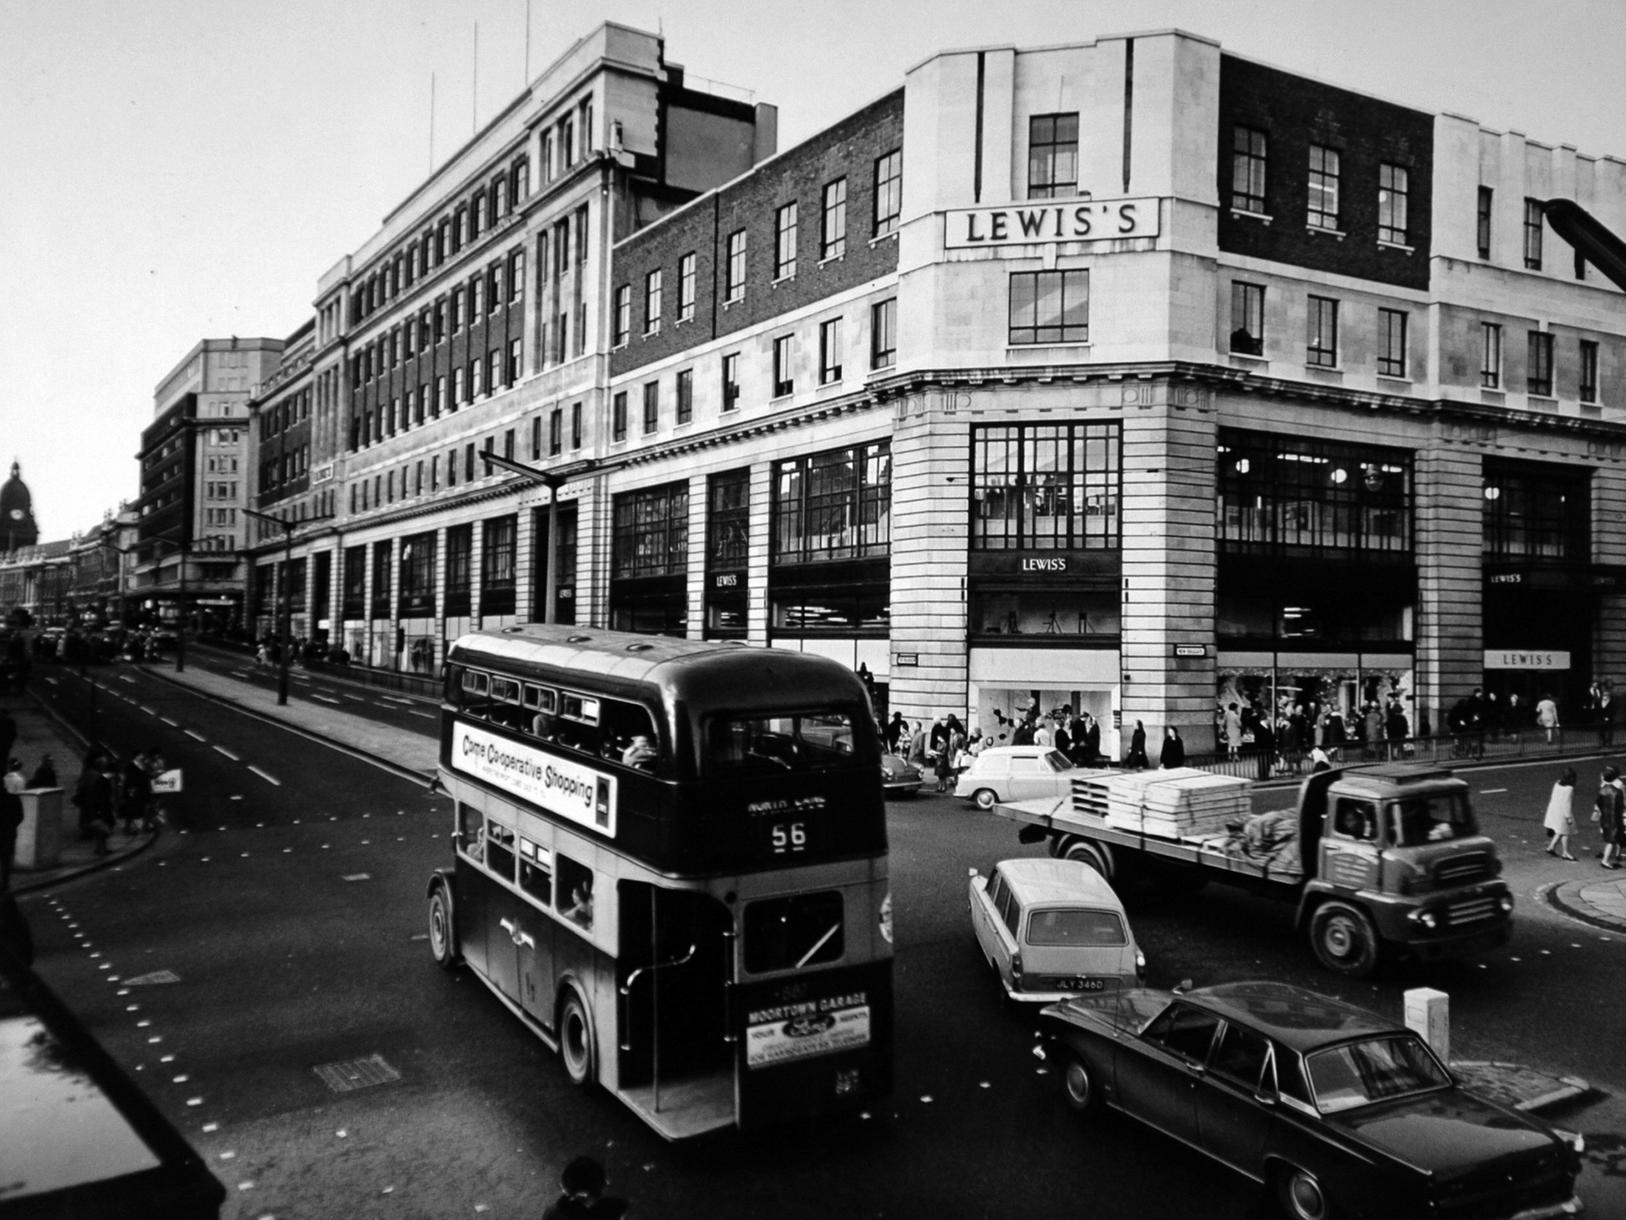 Lewis's huge department store on the Headrow sold everything from clothing to furniture and was a much loved shopping spot in the city. It later became a branch of Allders in the 1990s following the company's demise.